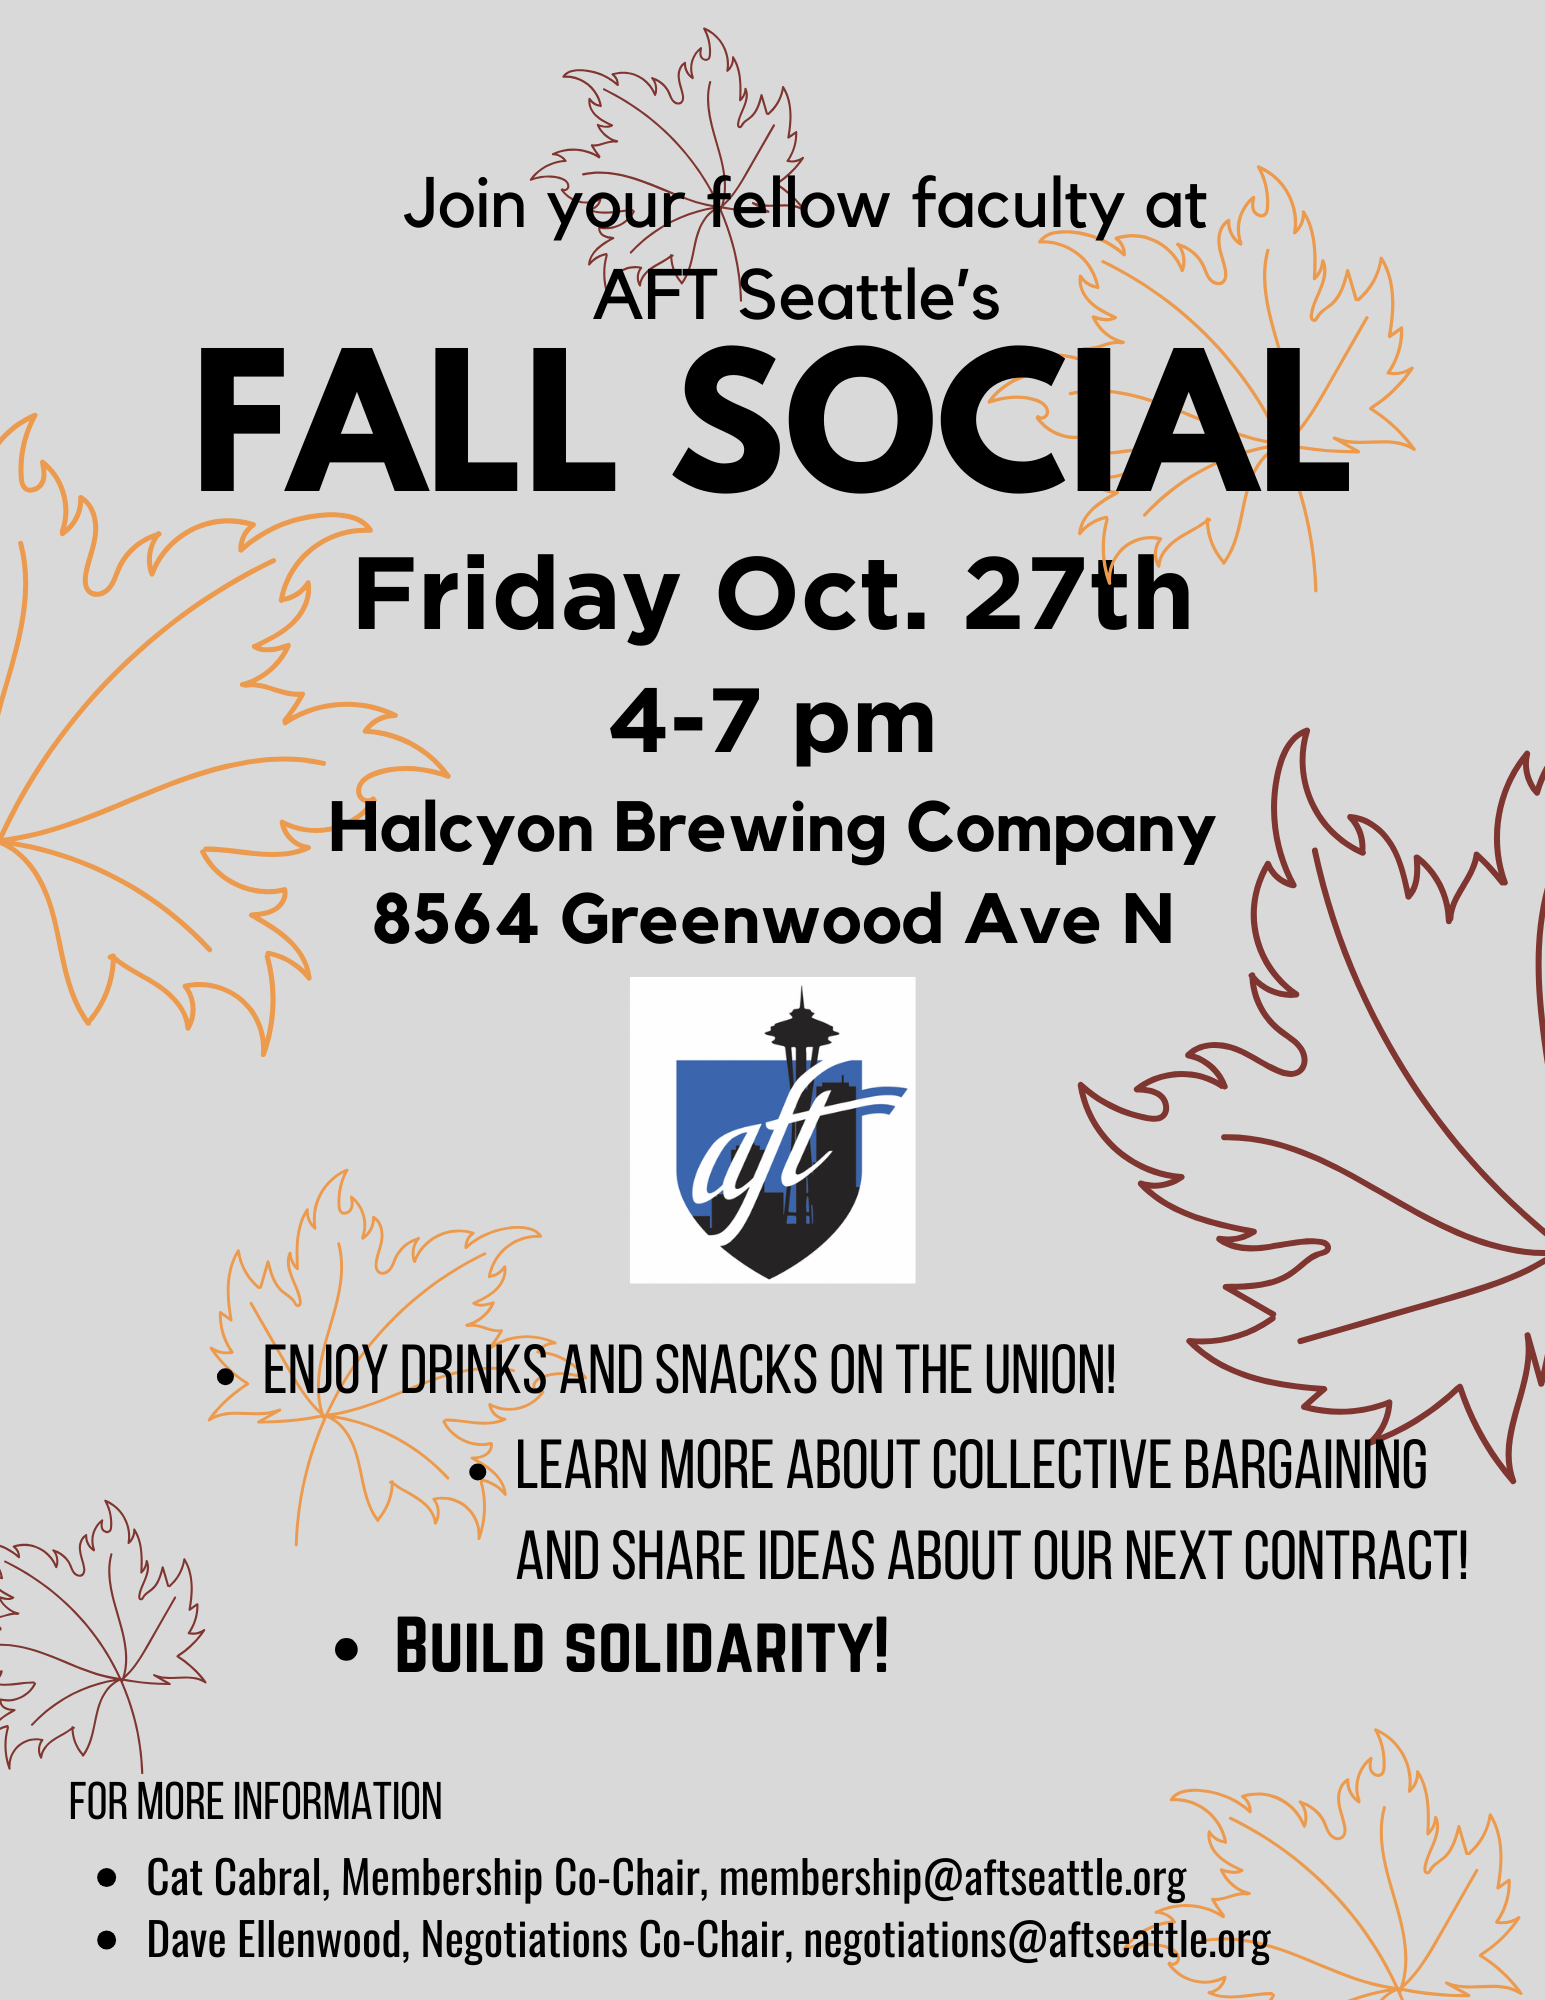 Join your fellow faculty at AFT Seattle's FALL SOCIAL  Enjoy drinks and snacks on the union Learn more about collective bargaining and share ideas about our next contract BUILD SOLIDARITY!